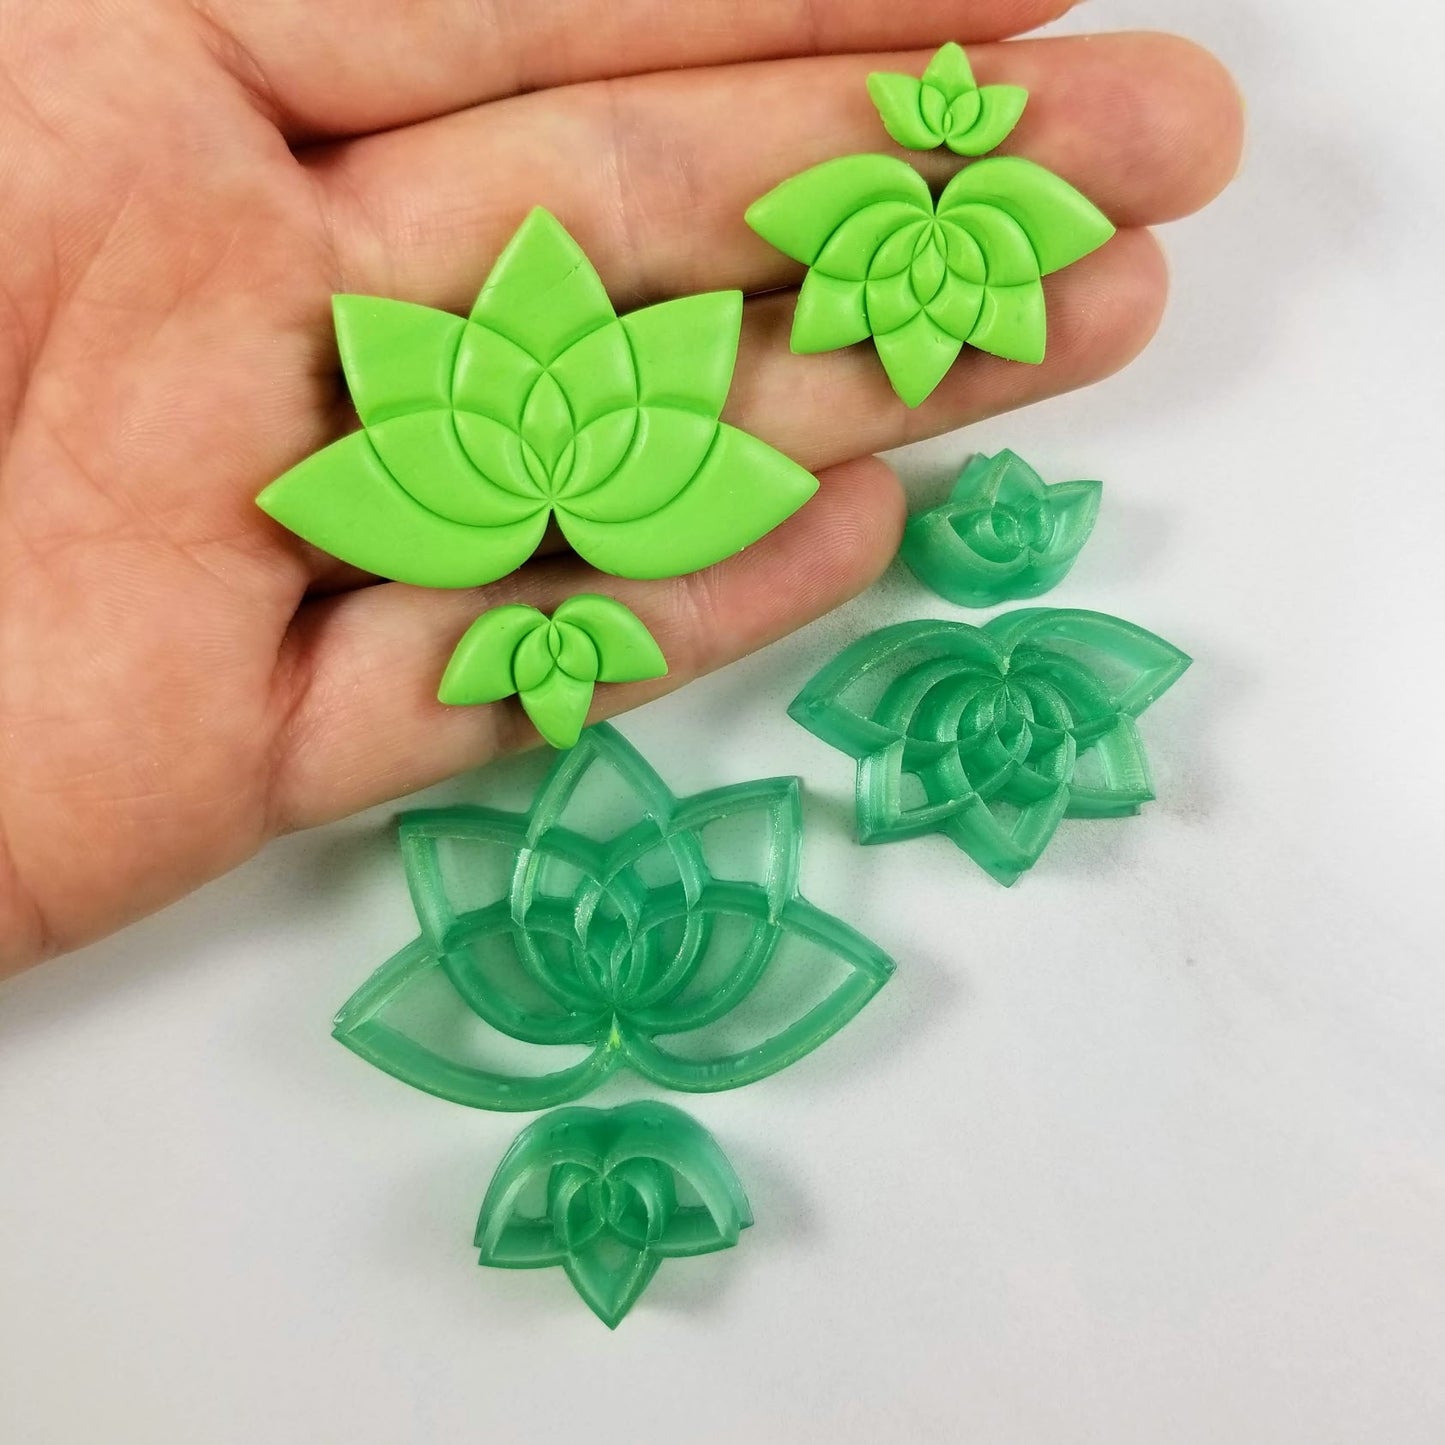 lotus polymer clay cutter for sizes 3 and 2 centimeters with finish product polymer clay sample for reference